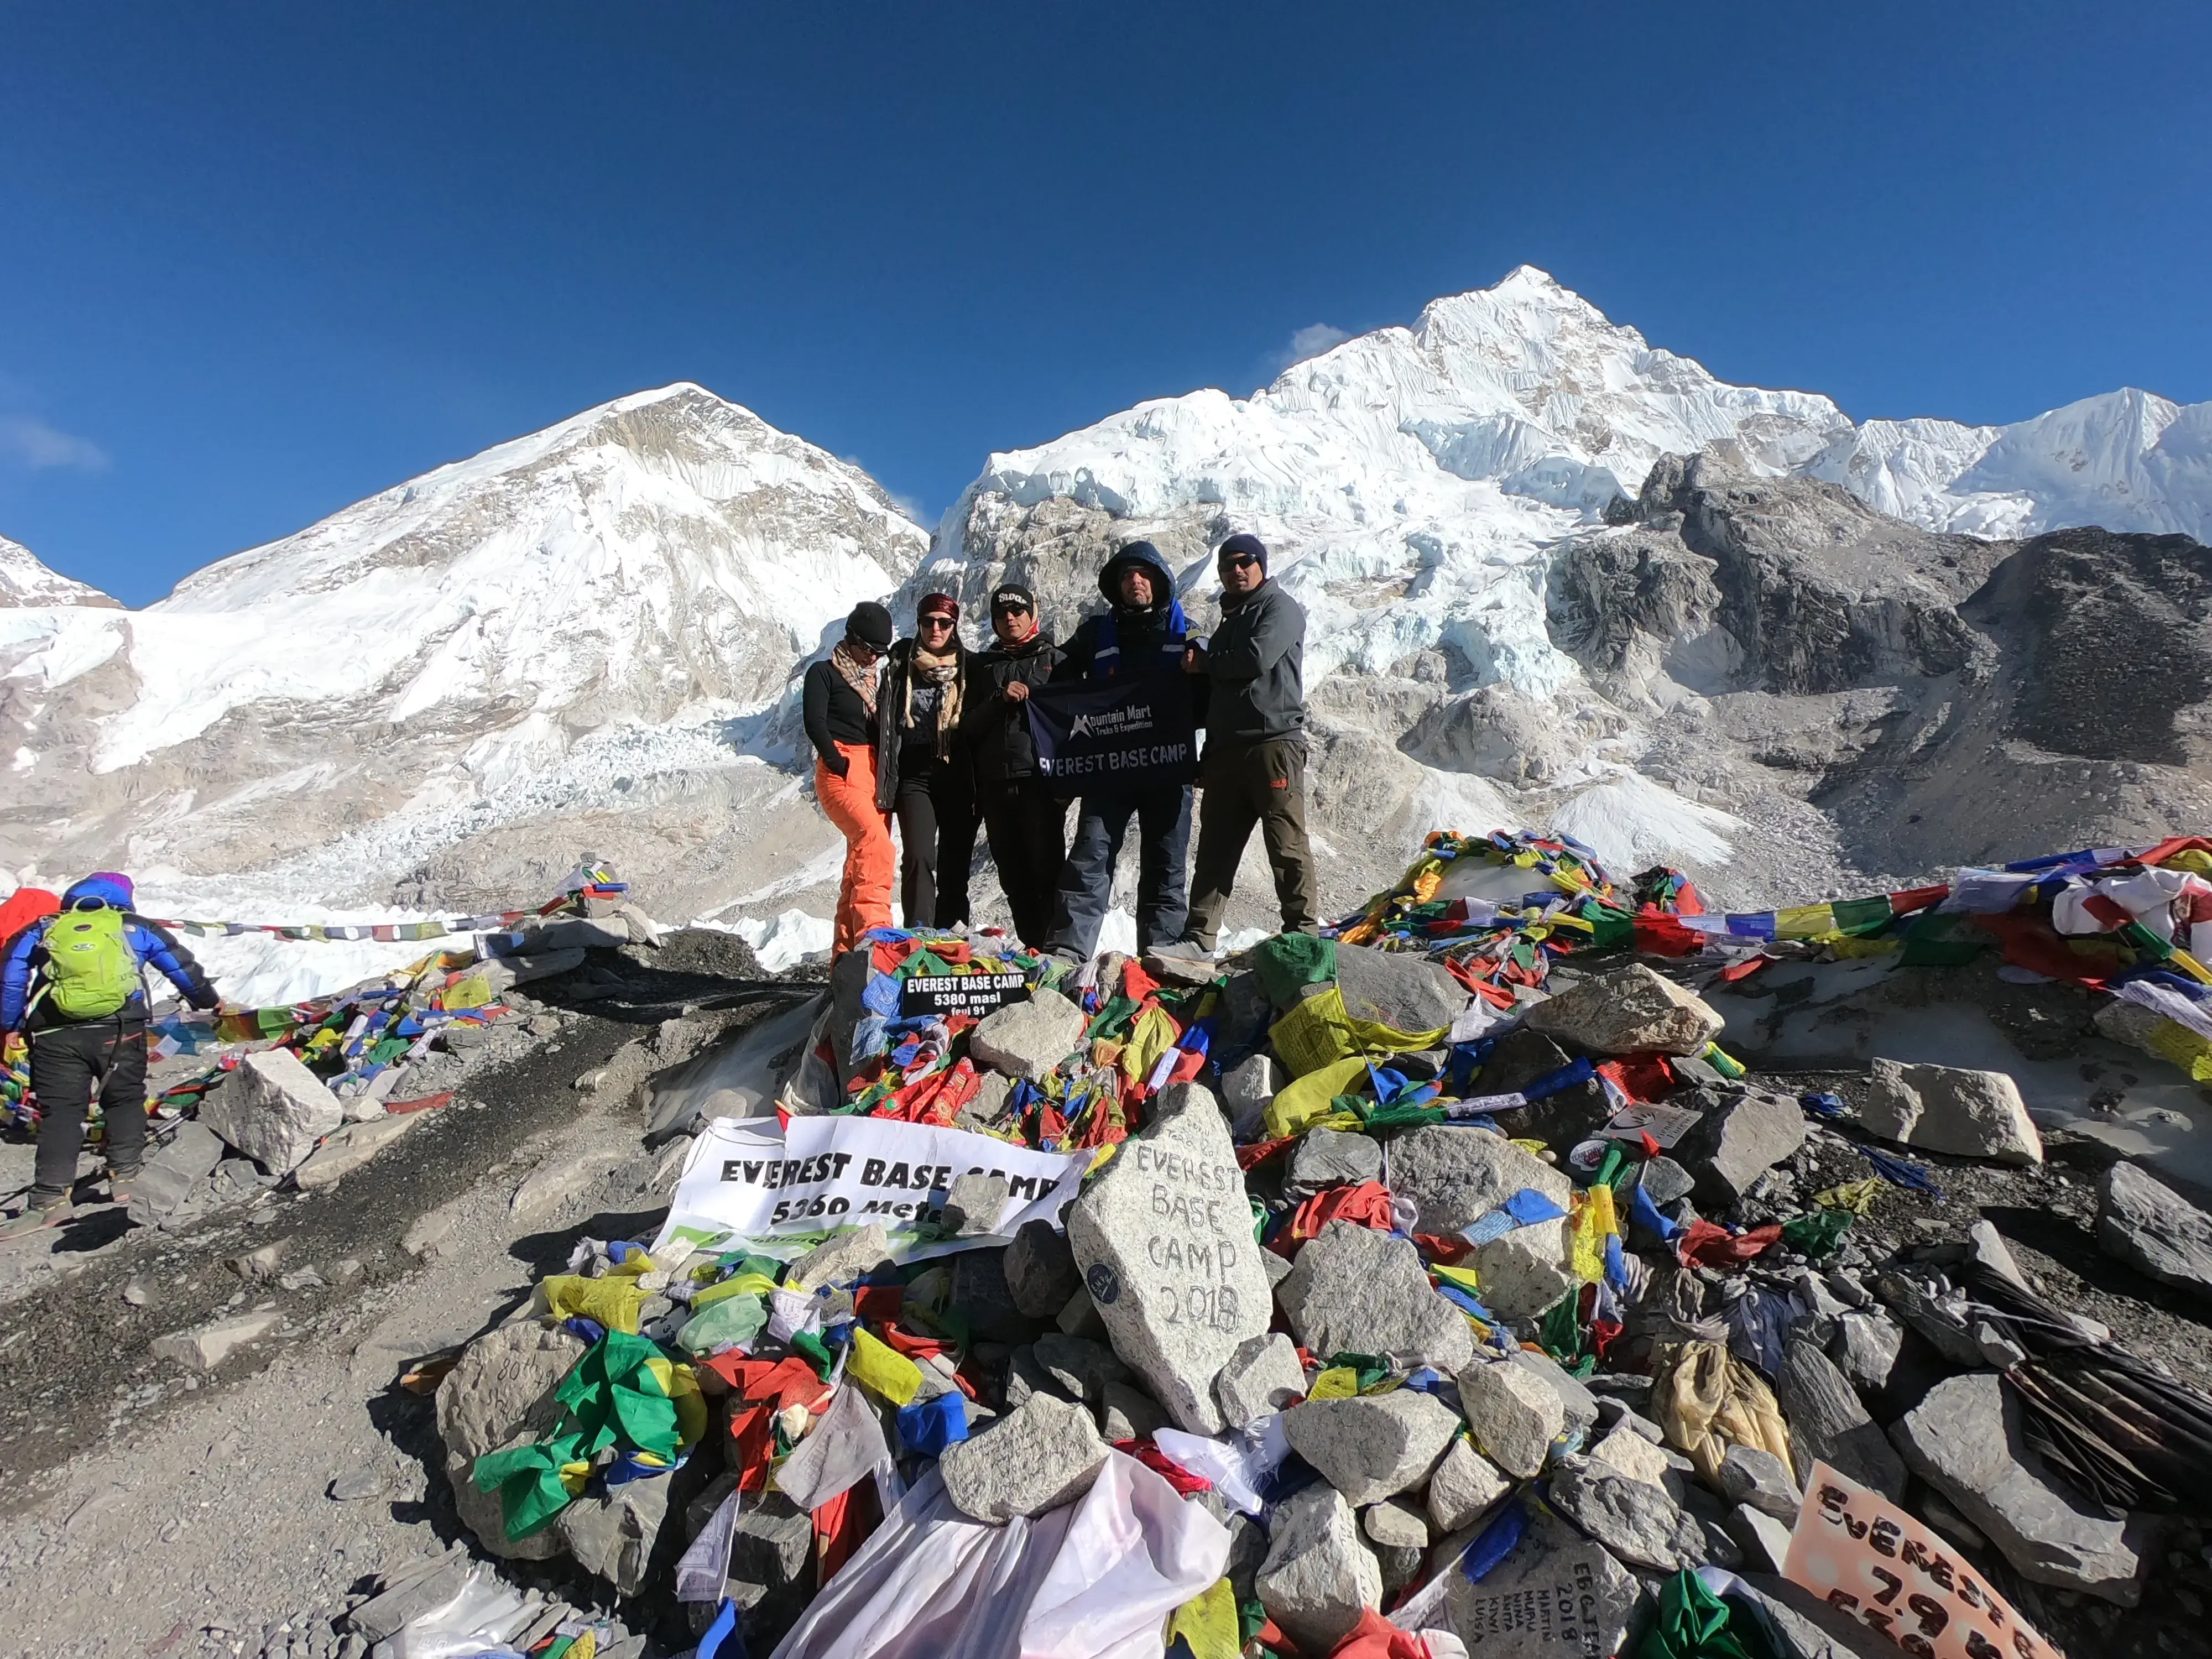 How much does it cost to climb Everest Base Camp?